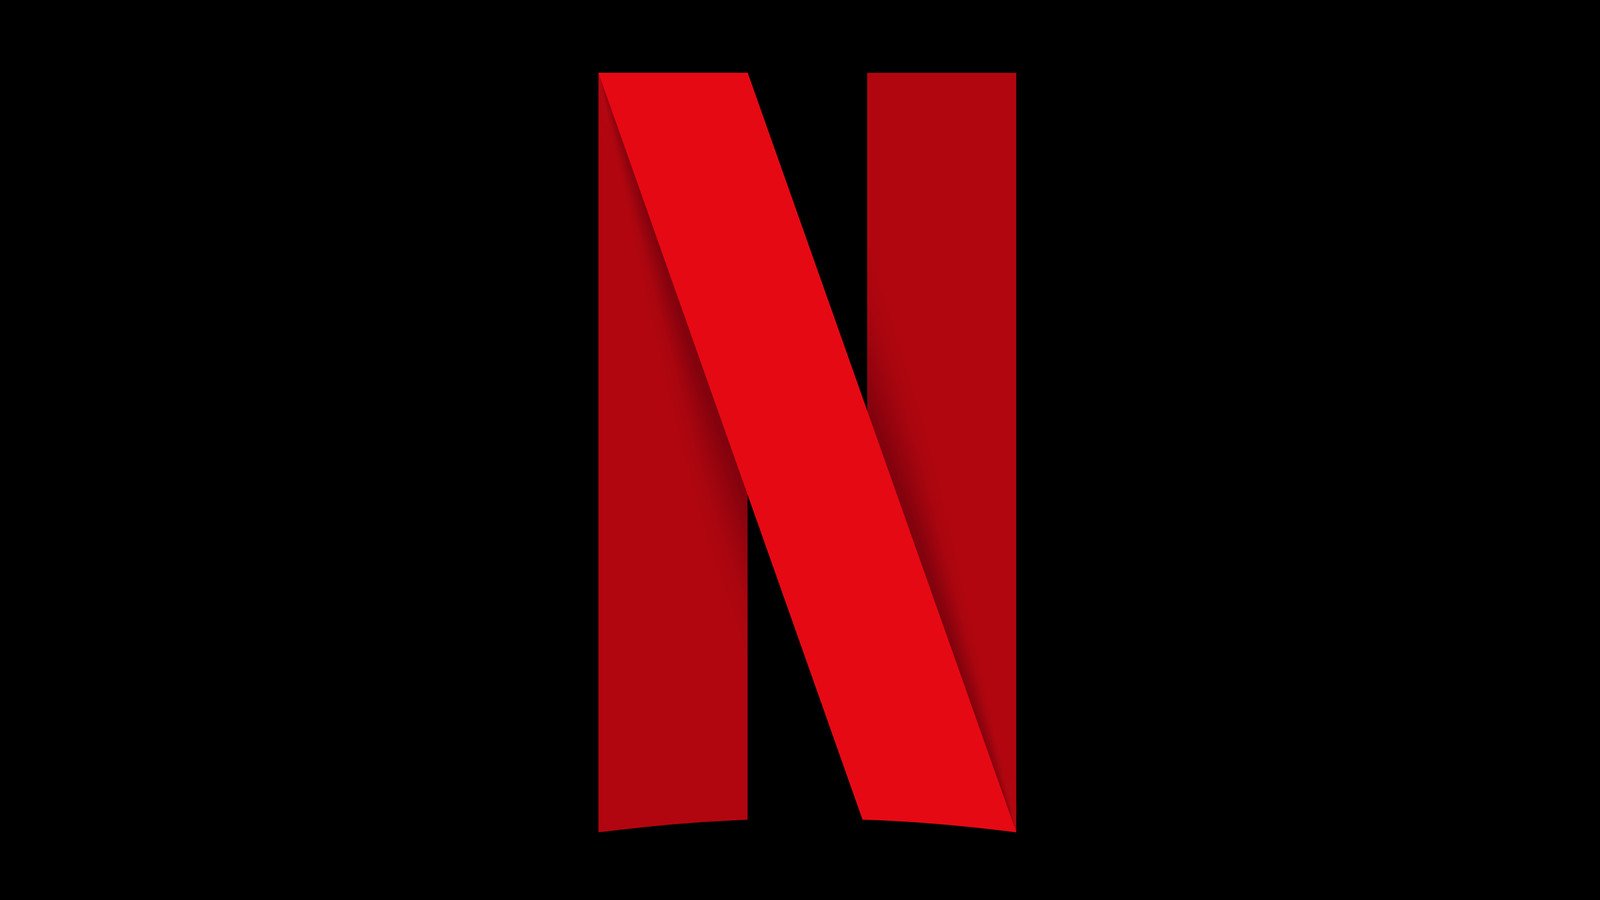 Upcoming Netflix app feature will allow you to listen to your favorite shows